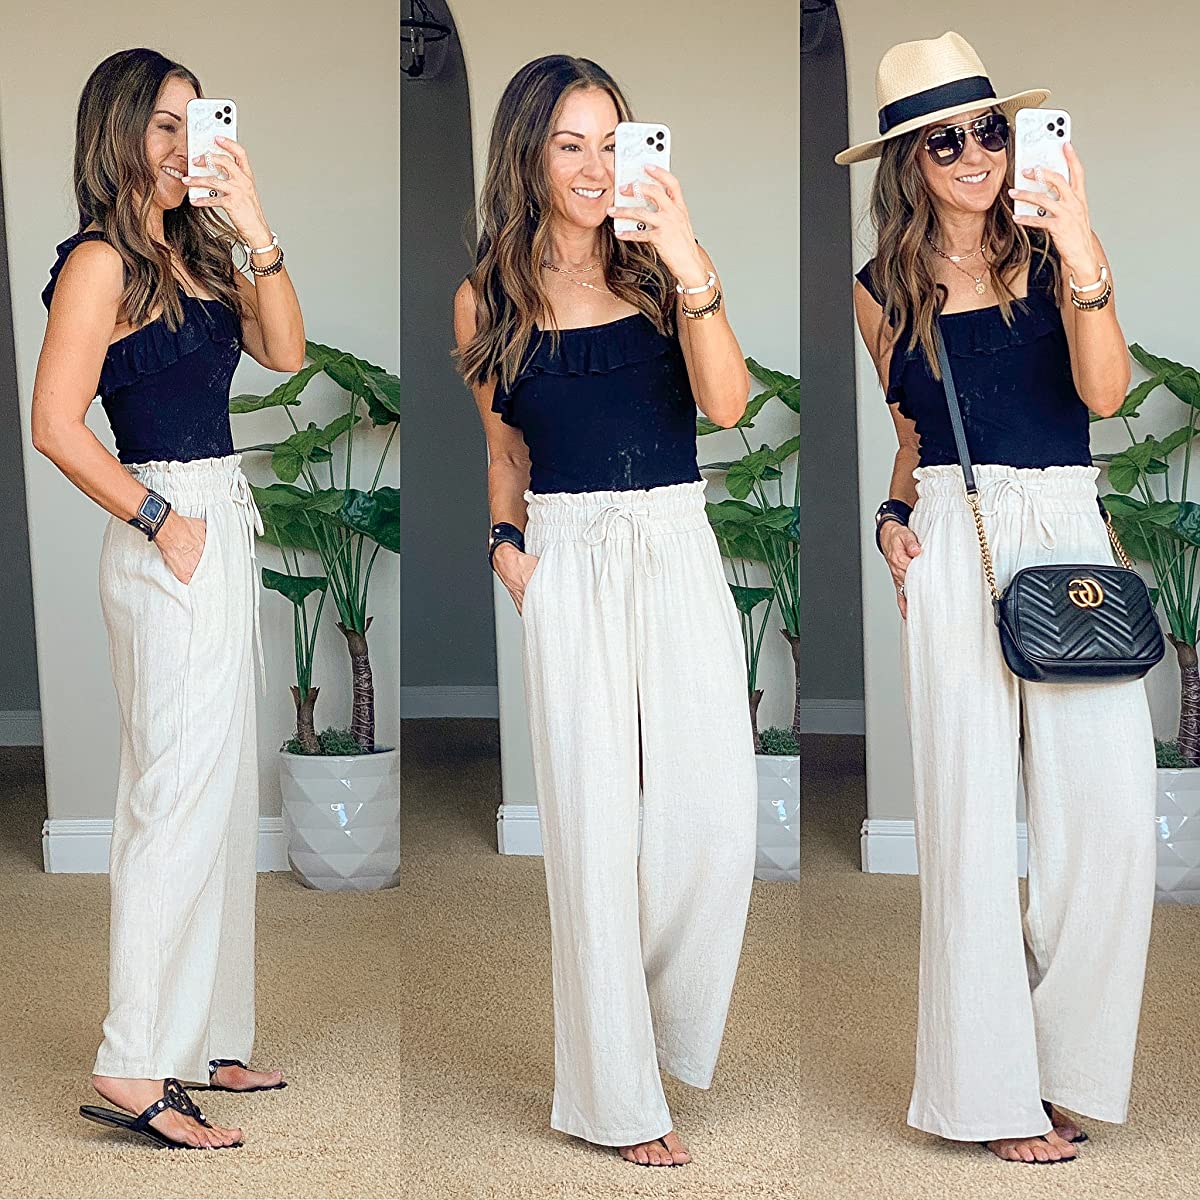 top 23 fashion favorites of 2023 | top 23 of 2023, fashion, fashion favorites, fashion finds, outfit inspo, vacation outfit, linen pants, tank top, sunglasses, sun hat, purse, sandals